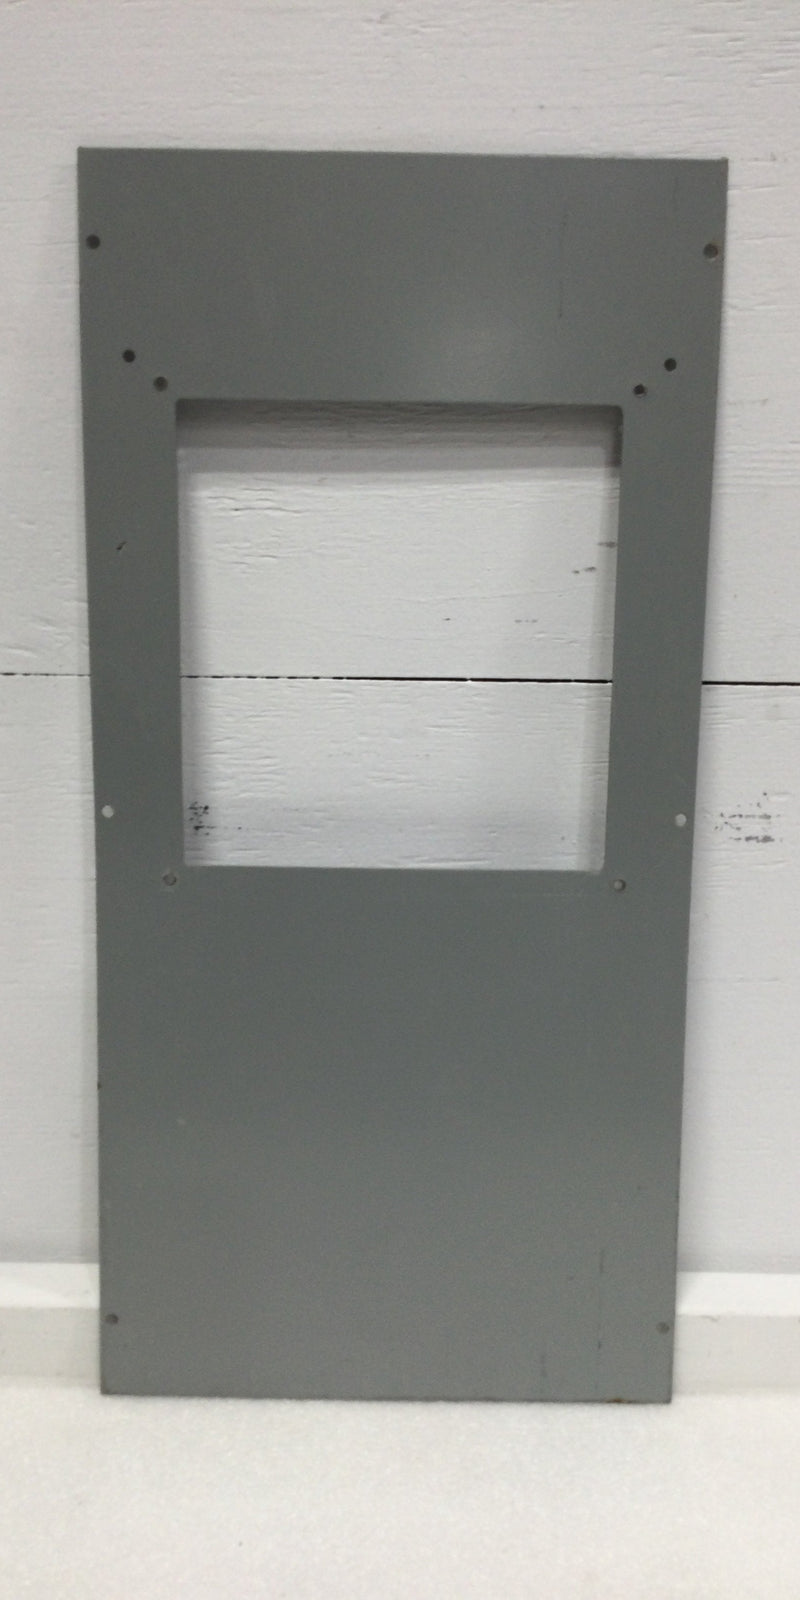 Eaton Cutler Hammer Panel Board Prl1a Cover/ Dead Front Only Nema1 22" x 10 5/8"